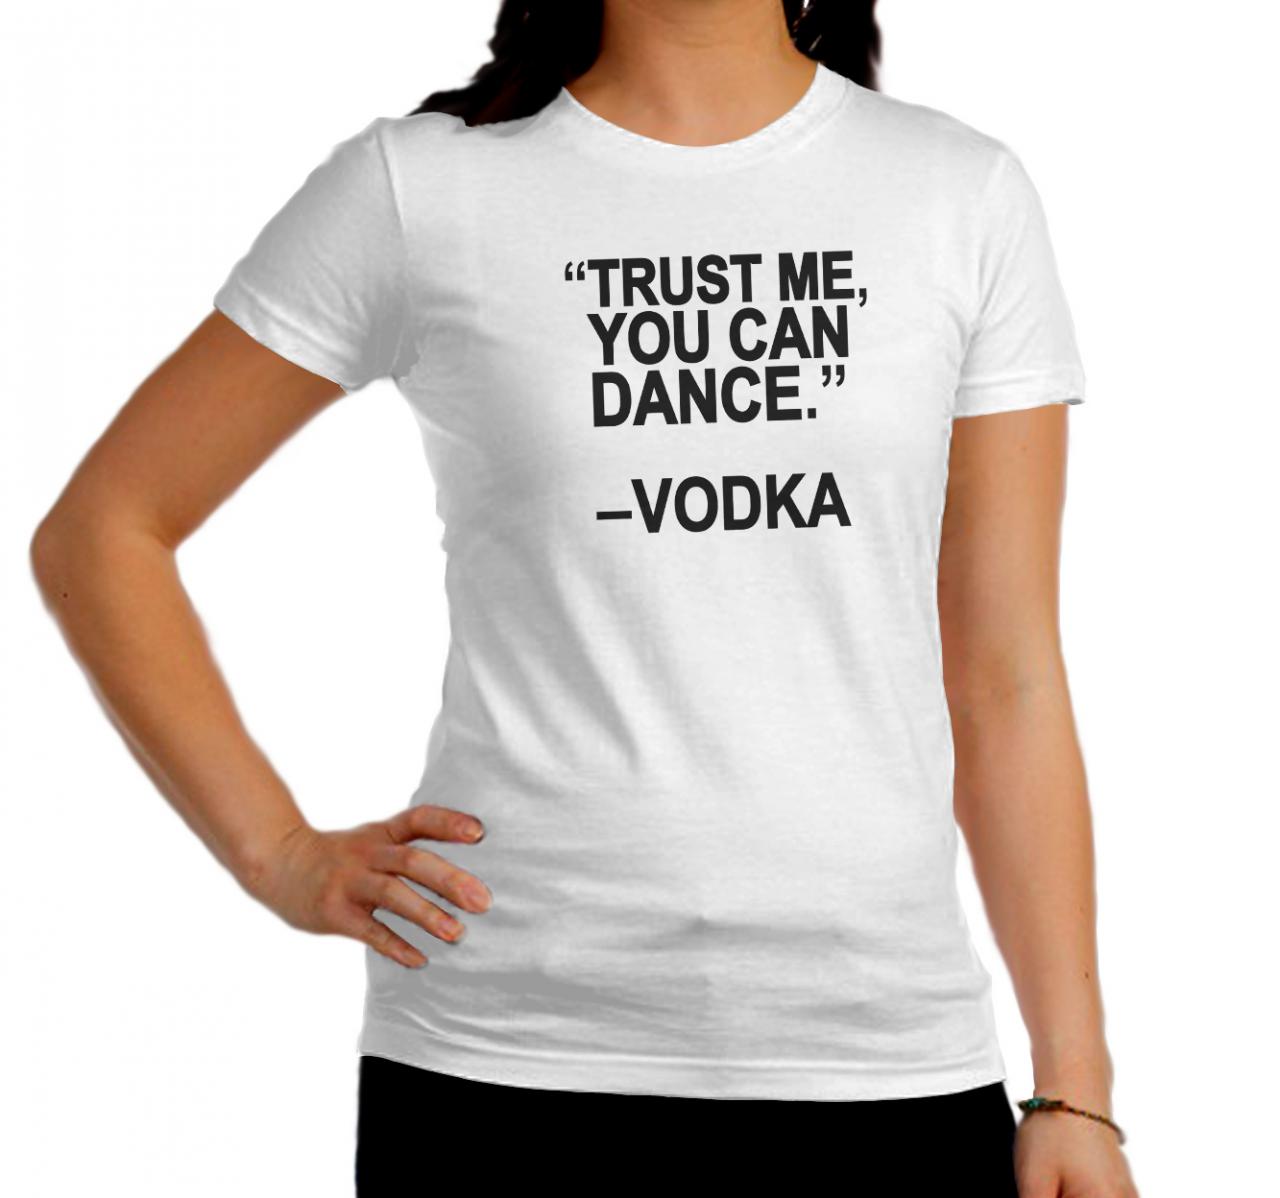 Vodca Drink Shirt Trust Me You Can Dance By Vodca Funny Women T-shirt White Black Tee Xs S M L Xl We Heart It Pinterest Tumblr Vd01